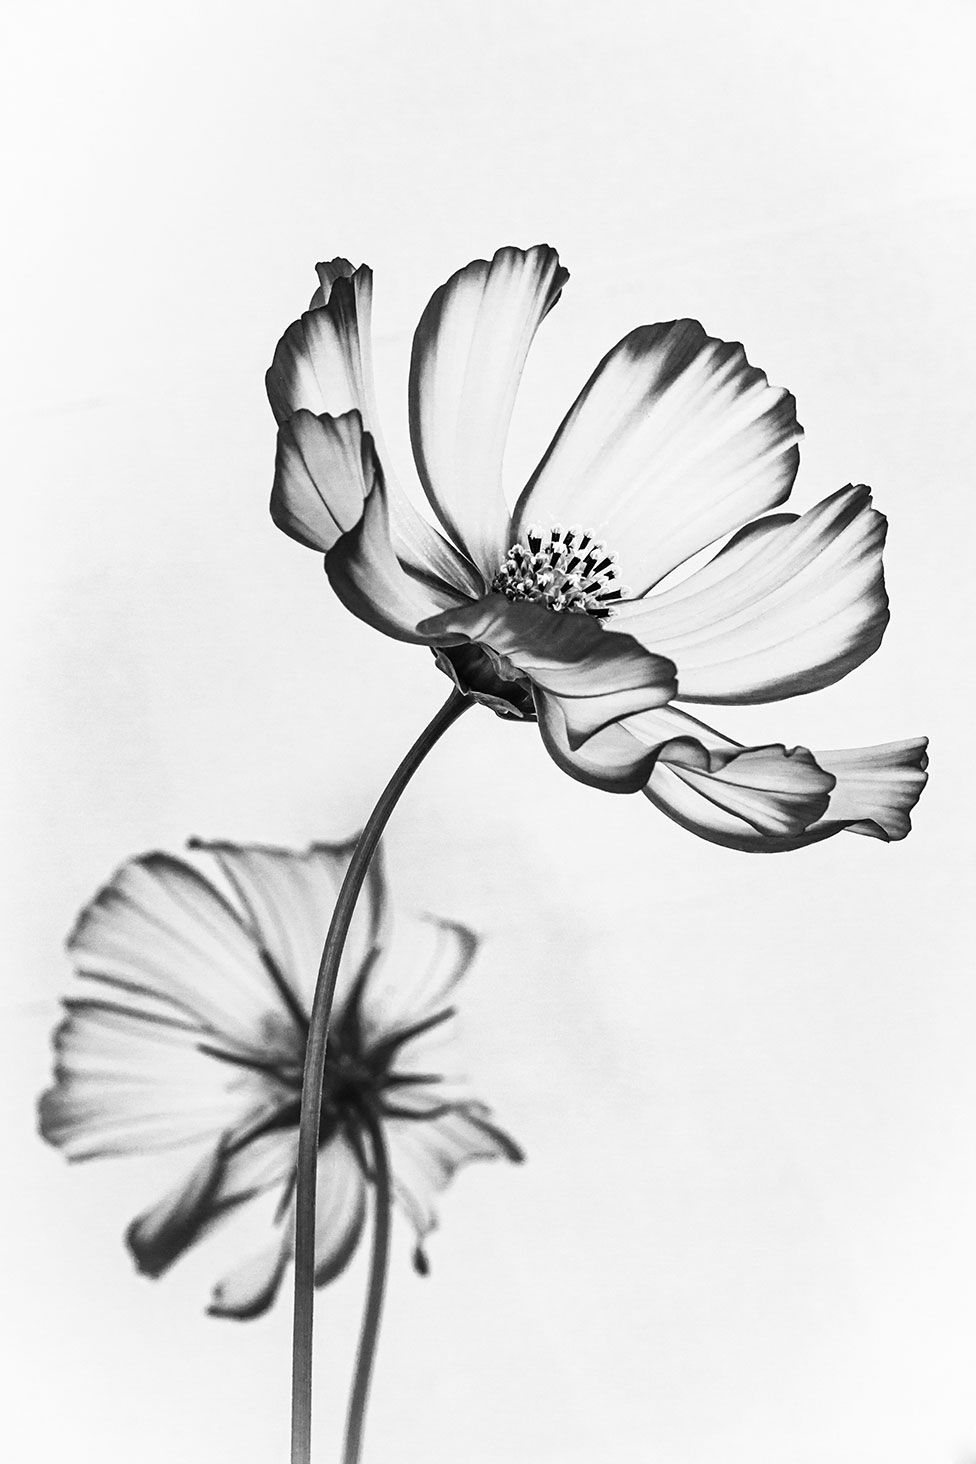 A black and white image of two flowers